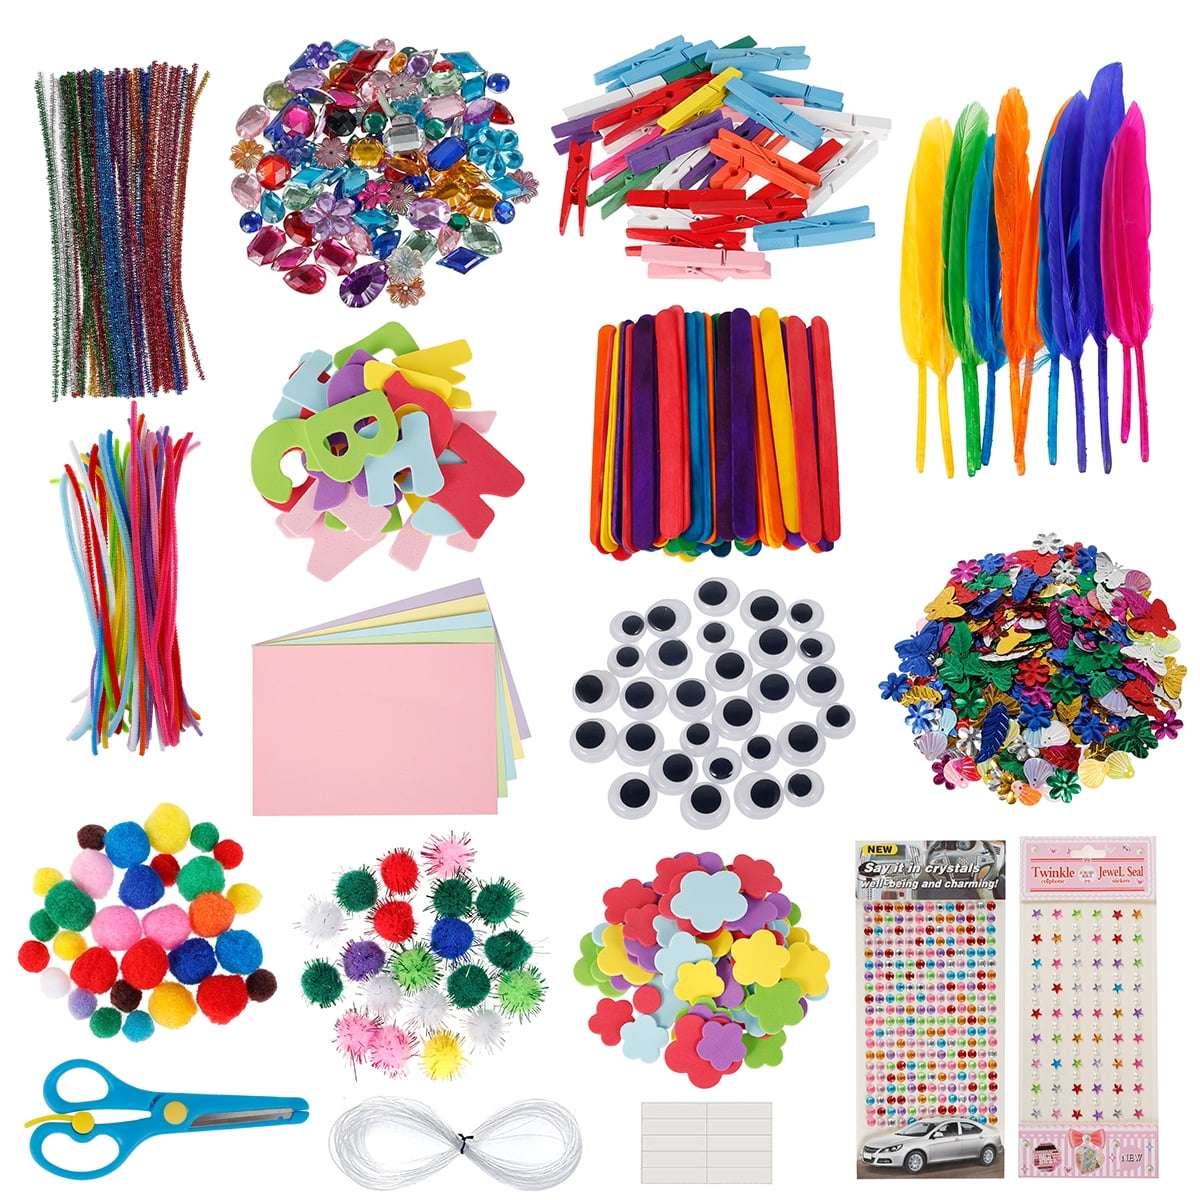 Wholesale DIY Arts and Crafts Store for Students and Professionals